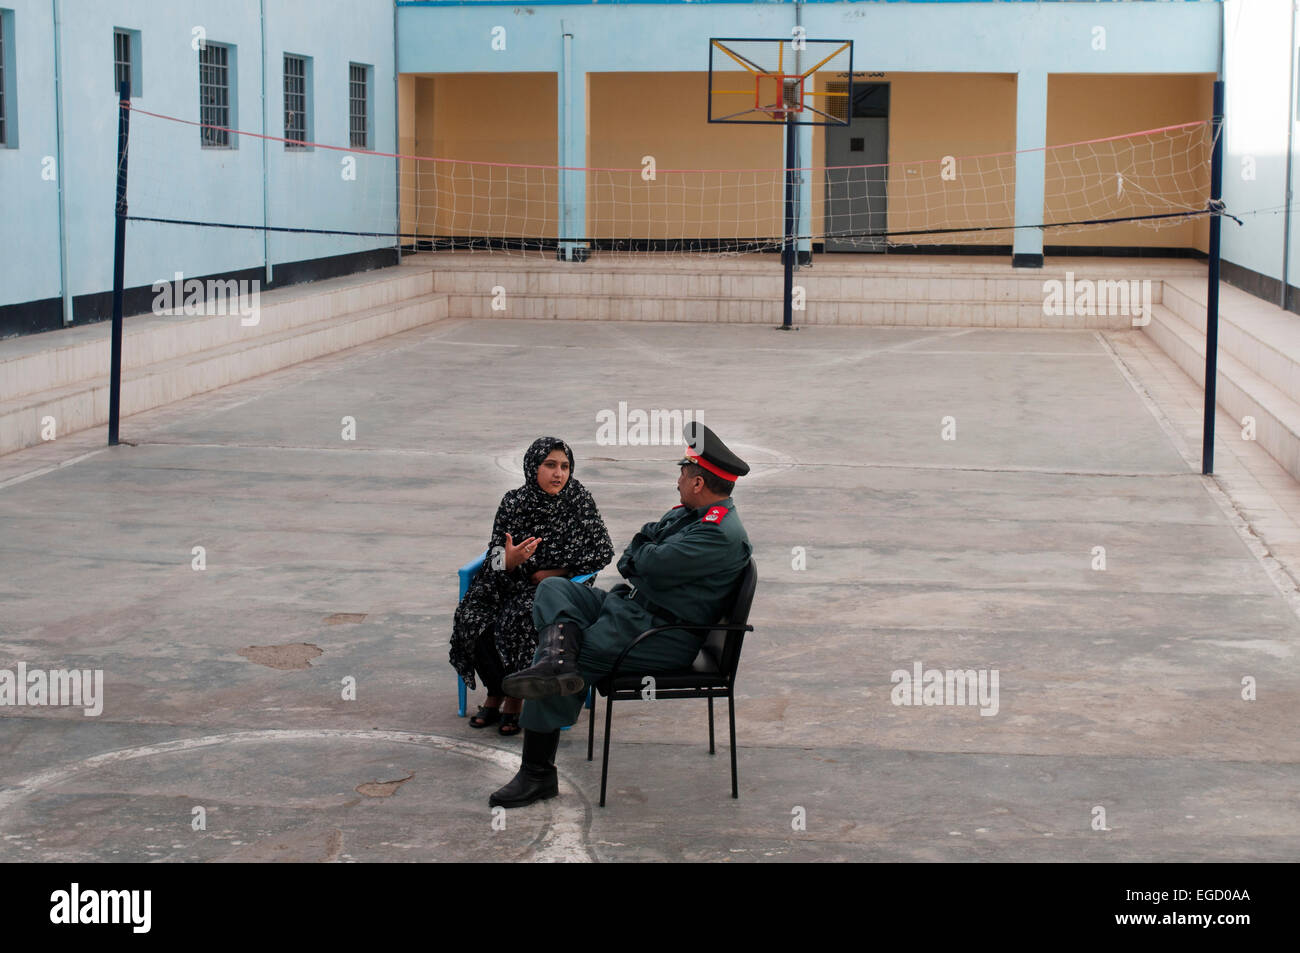 Herat Women's prison. The Prison governor has a private chat with a woman prisoner in the volleyball court. Stock Photo